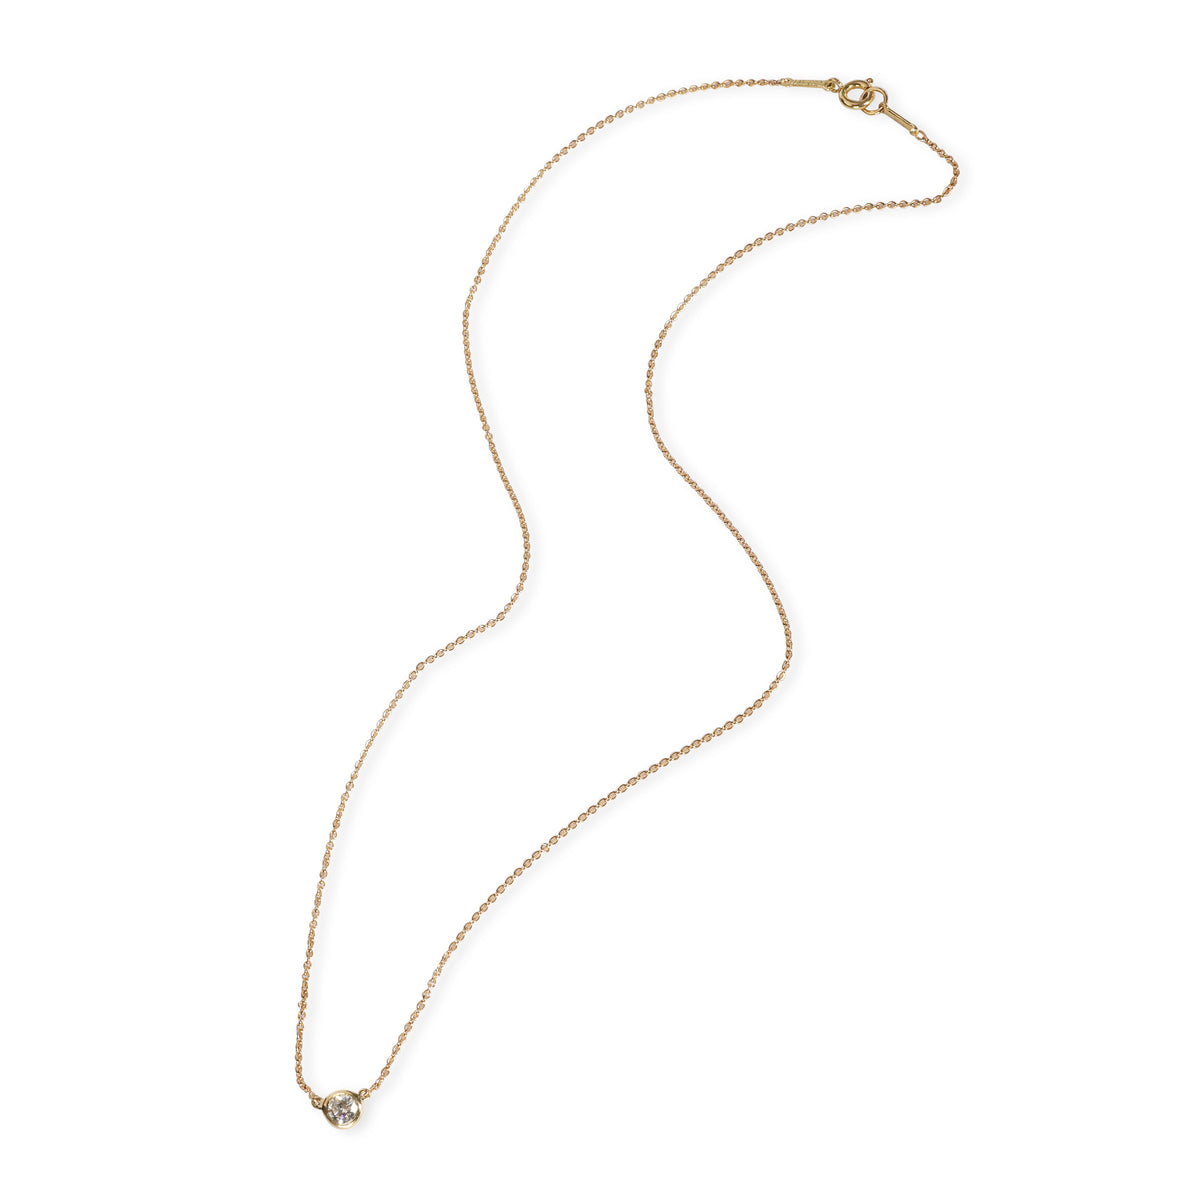 Tiffany Elsa Peretti Diamond by The Yard Necklace in 18K Yellow Gold 0.25 CT